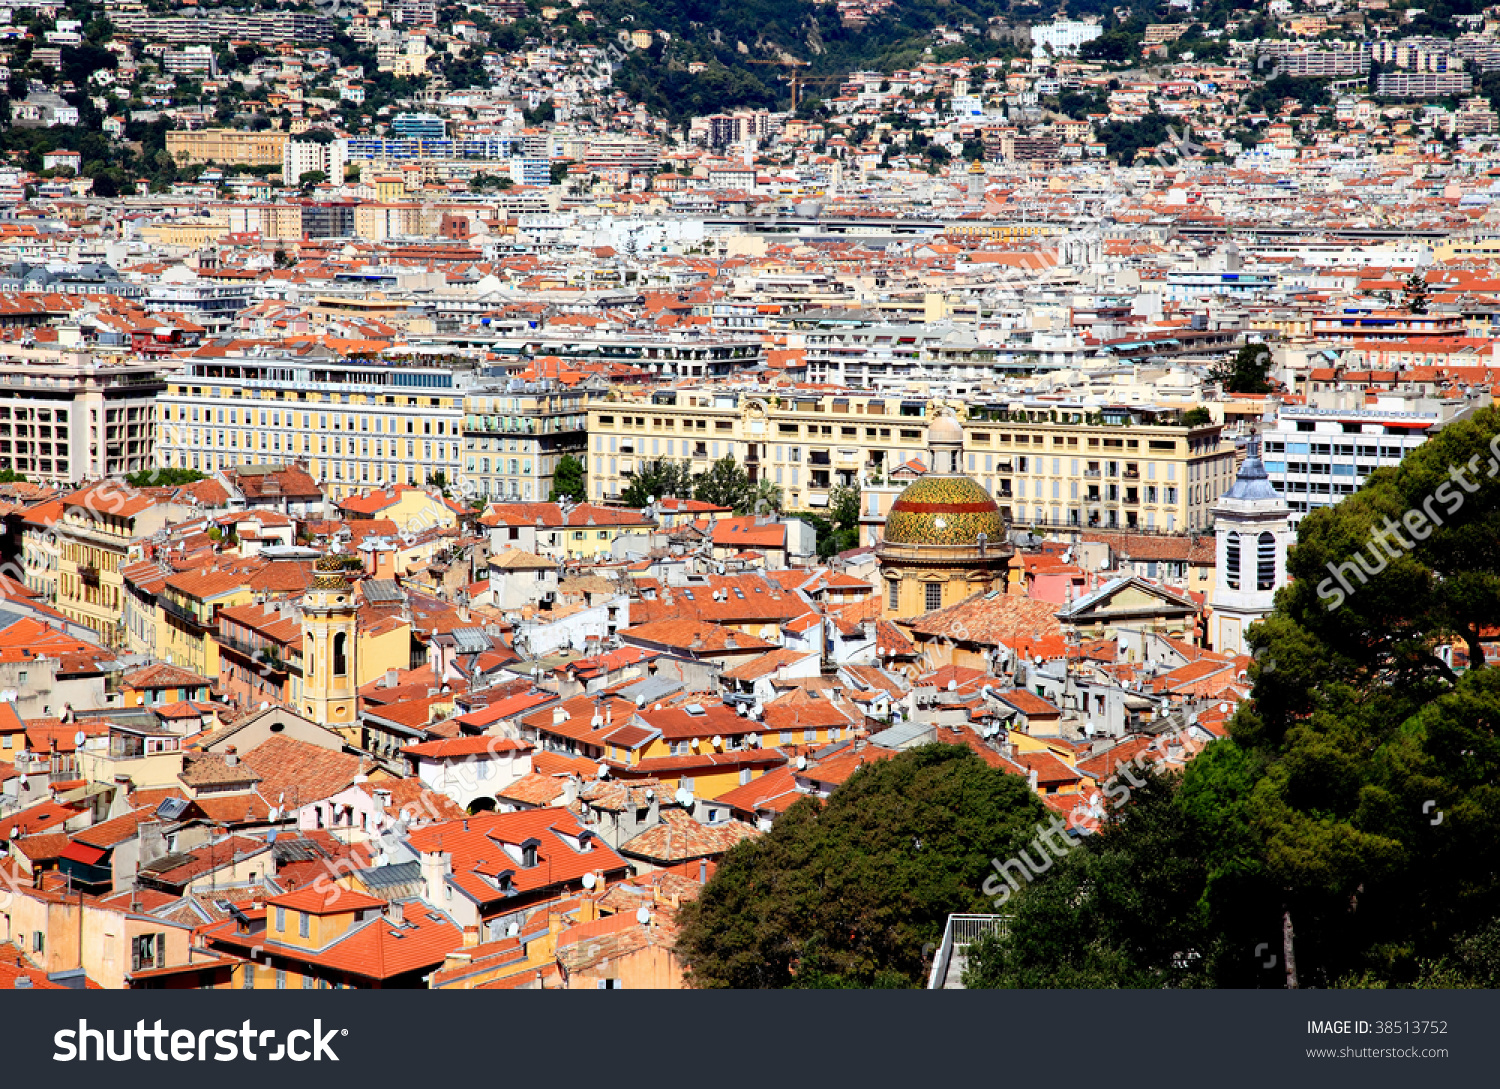 aerial view of the Nice old town France #38513752